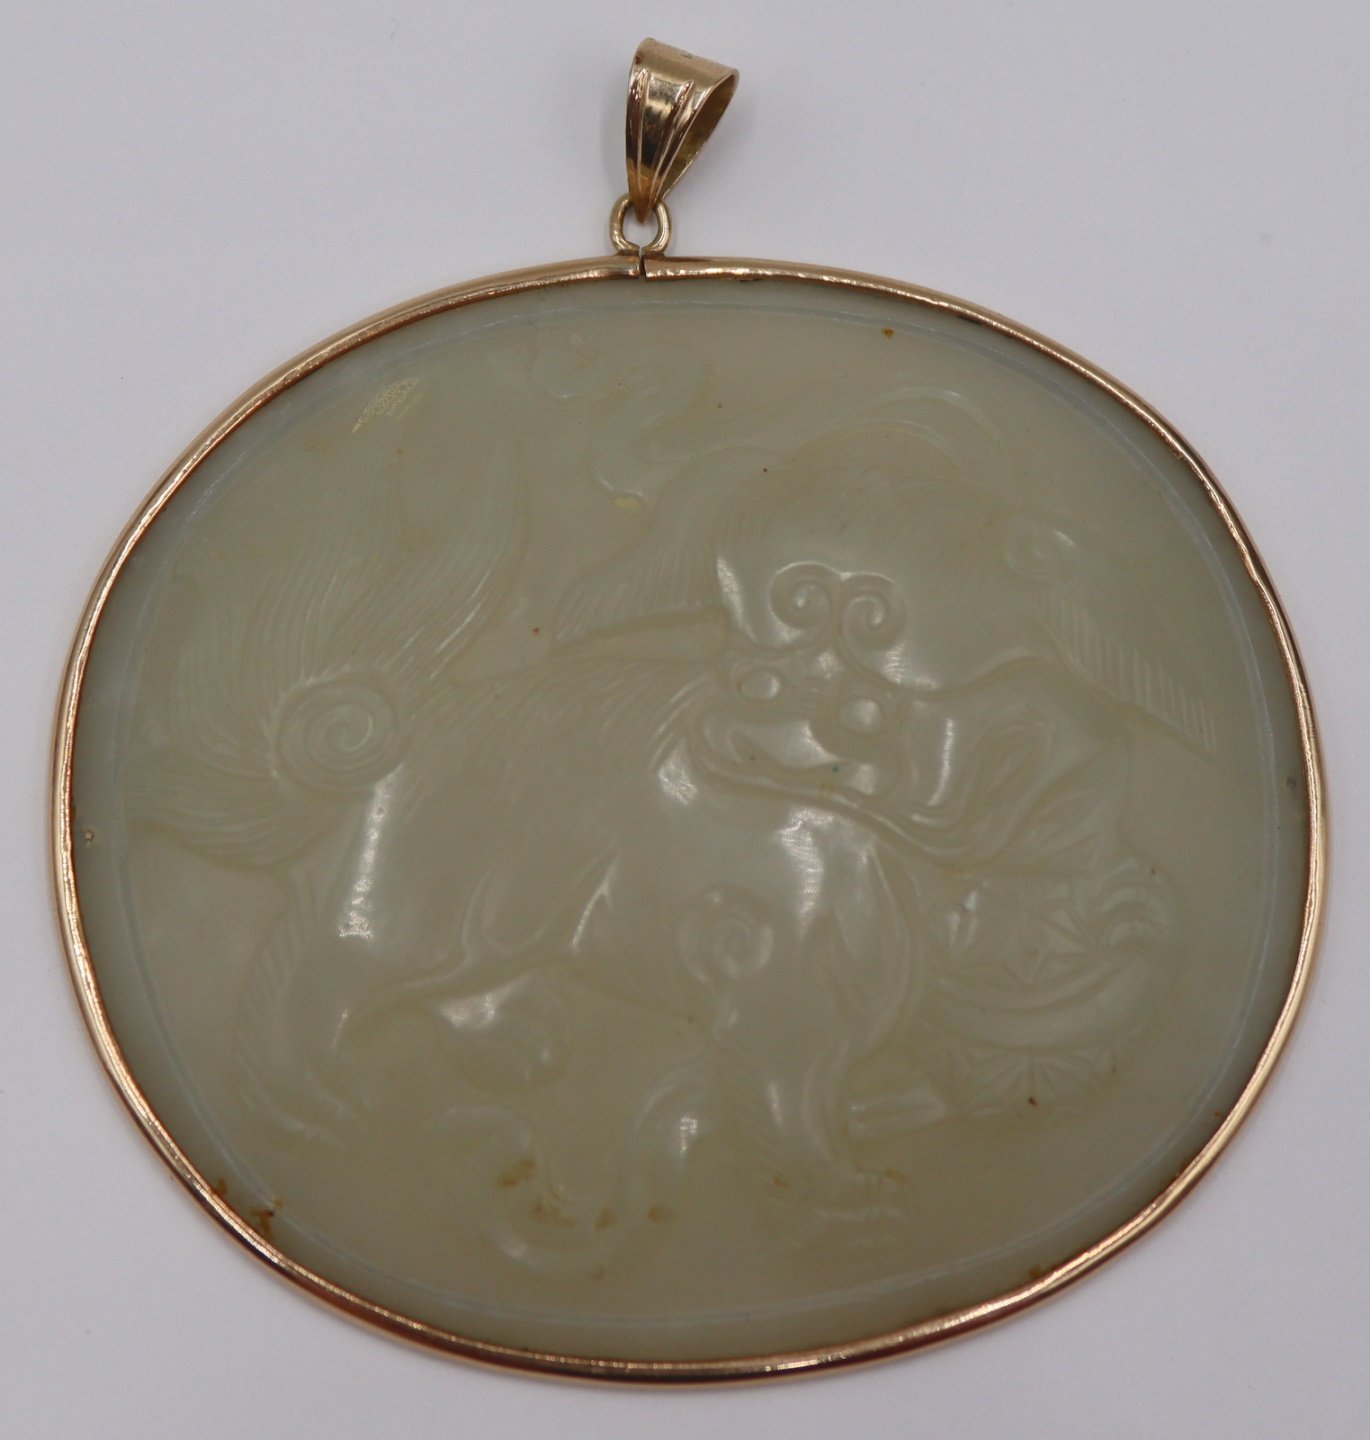 JEWELRY 14KT GOLD MOUNTED JADE 3bc45c